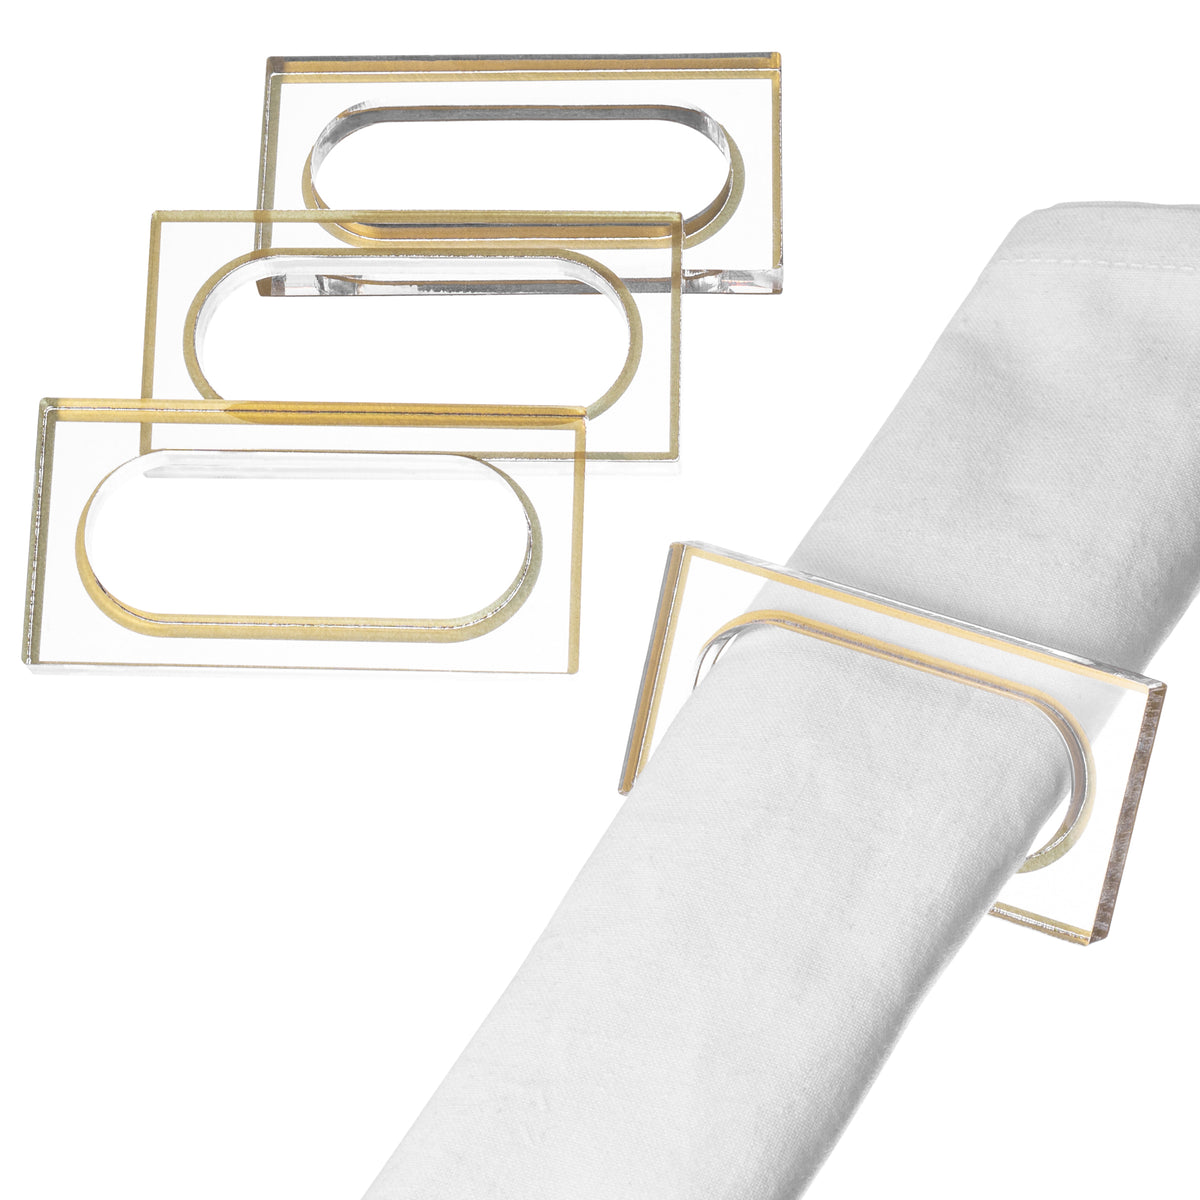 Waterdale Lucite Napkin Rings Cut Out Rectangle, Gold, Set of 4